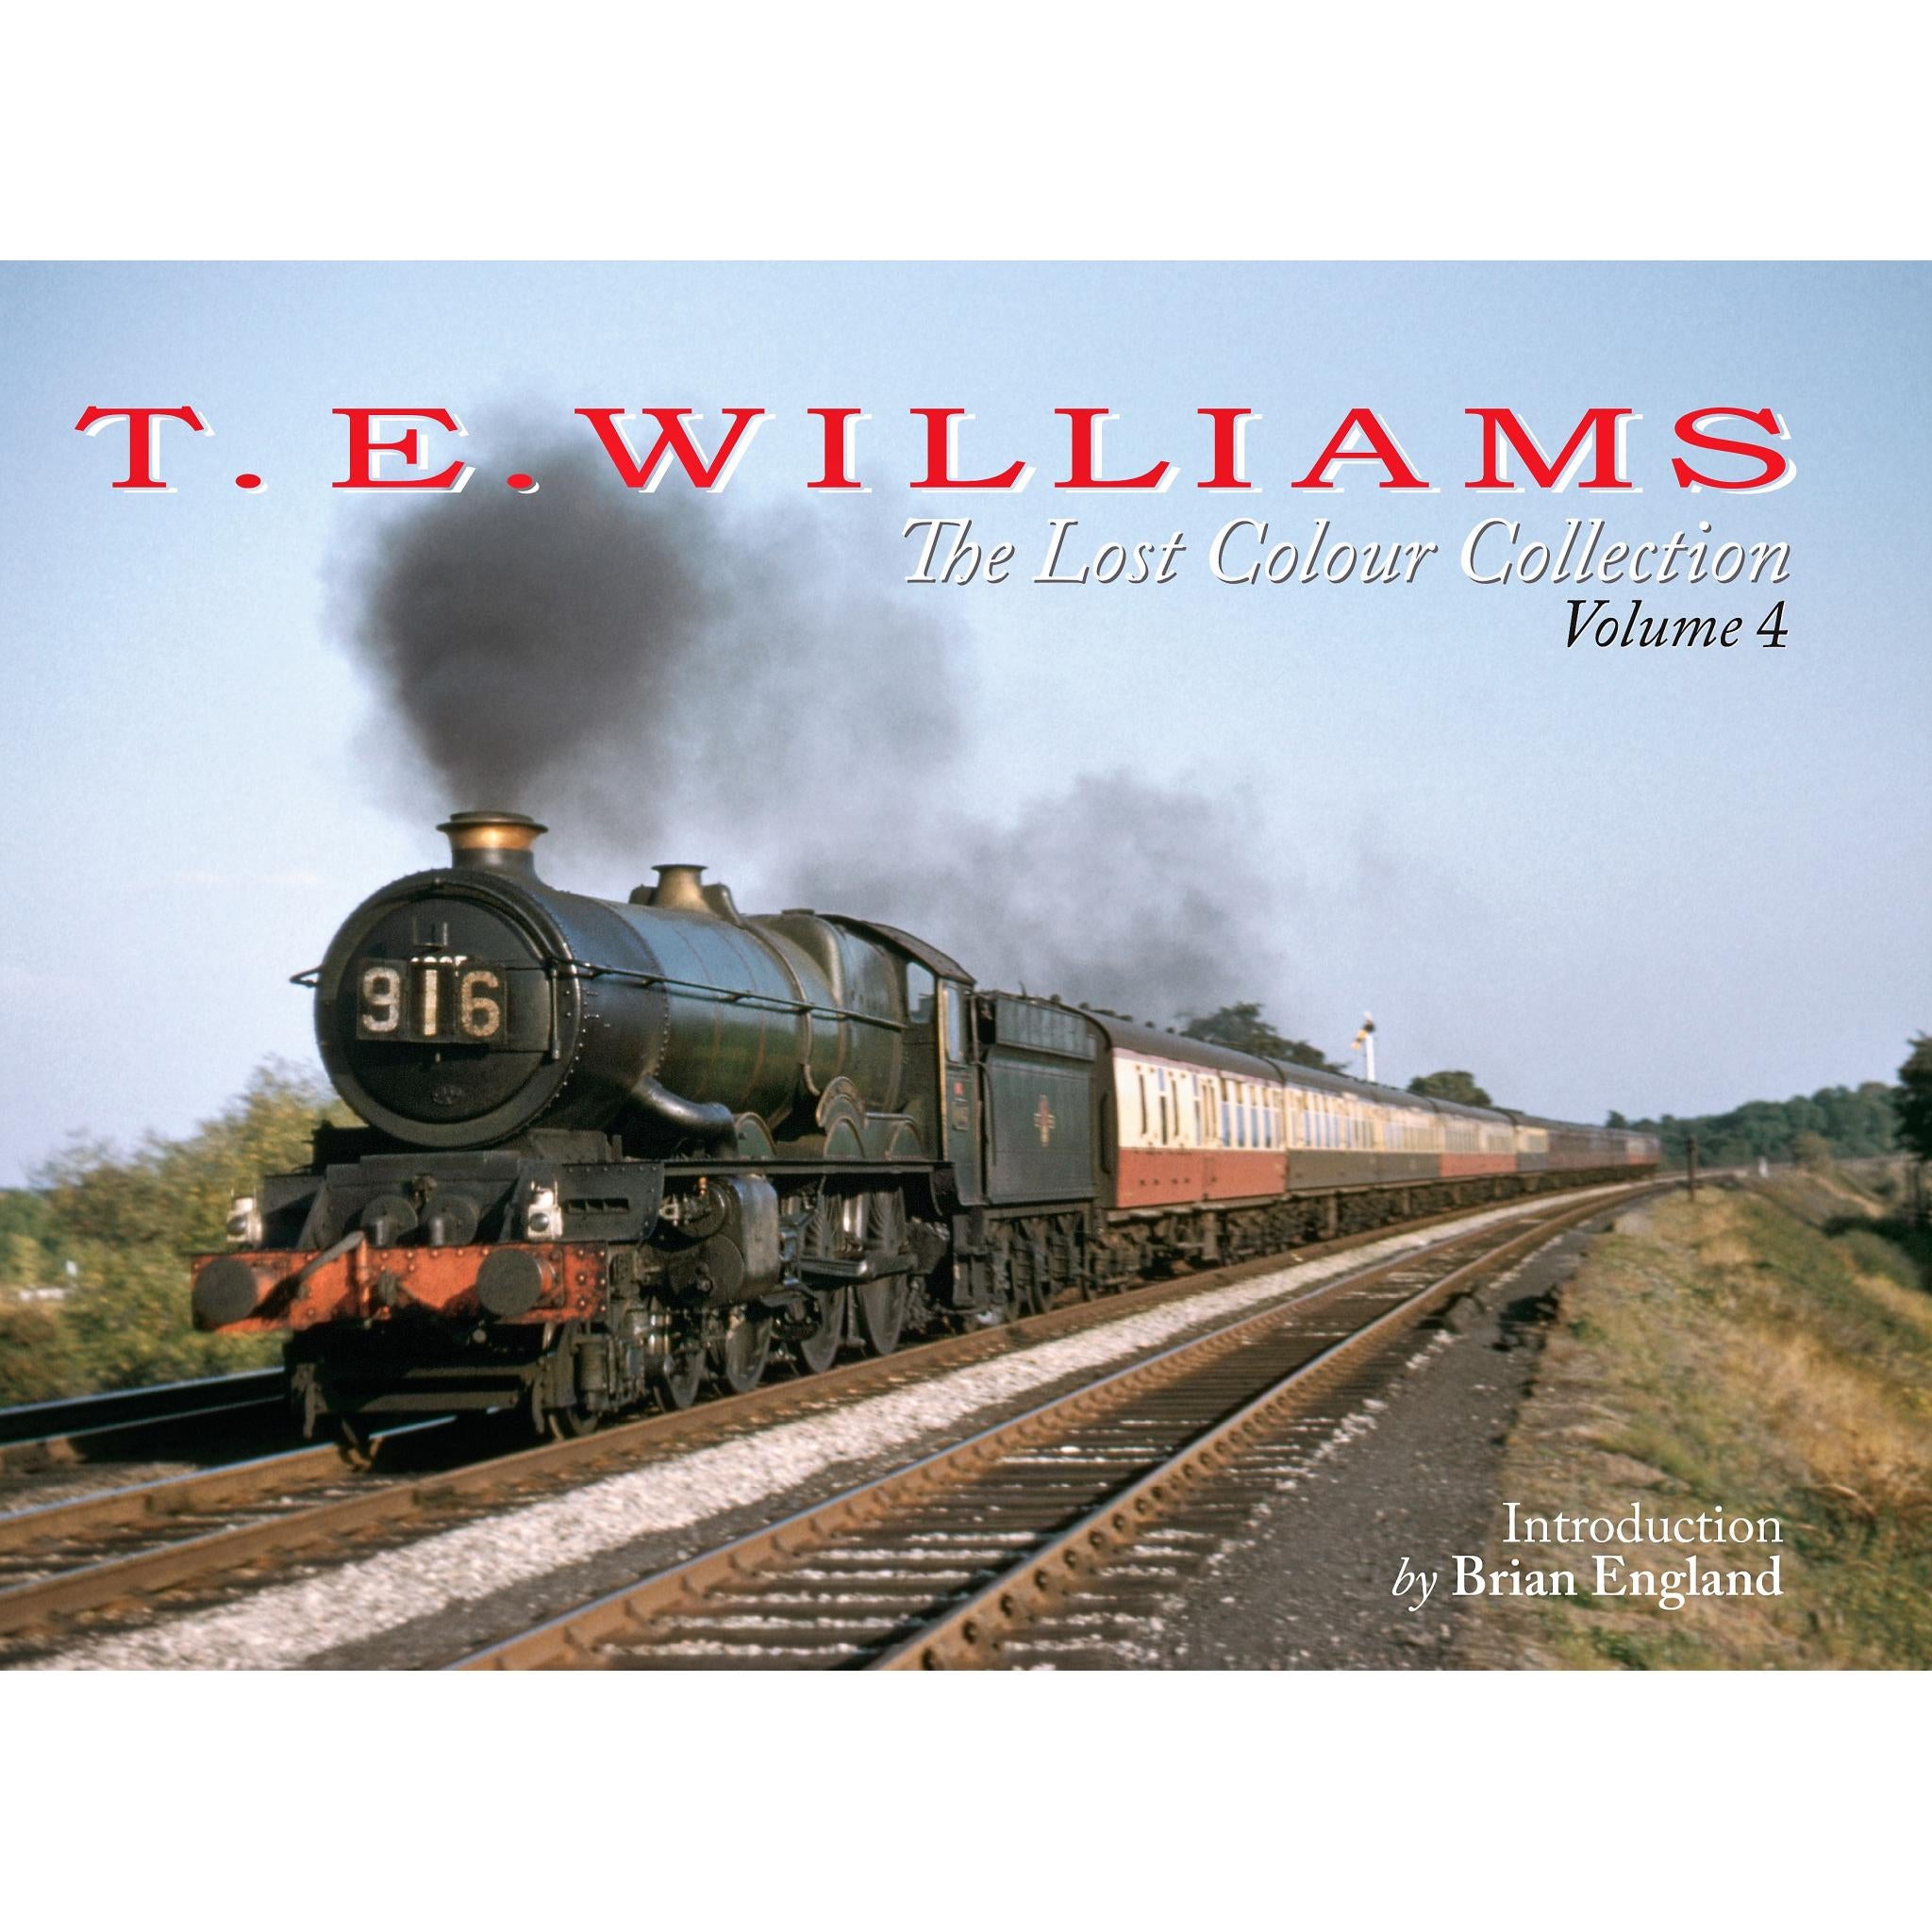 50%+ OFF RRP is £25.95  T. E. WILLIAMS: The Lost Colour Collection Vol. 4